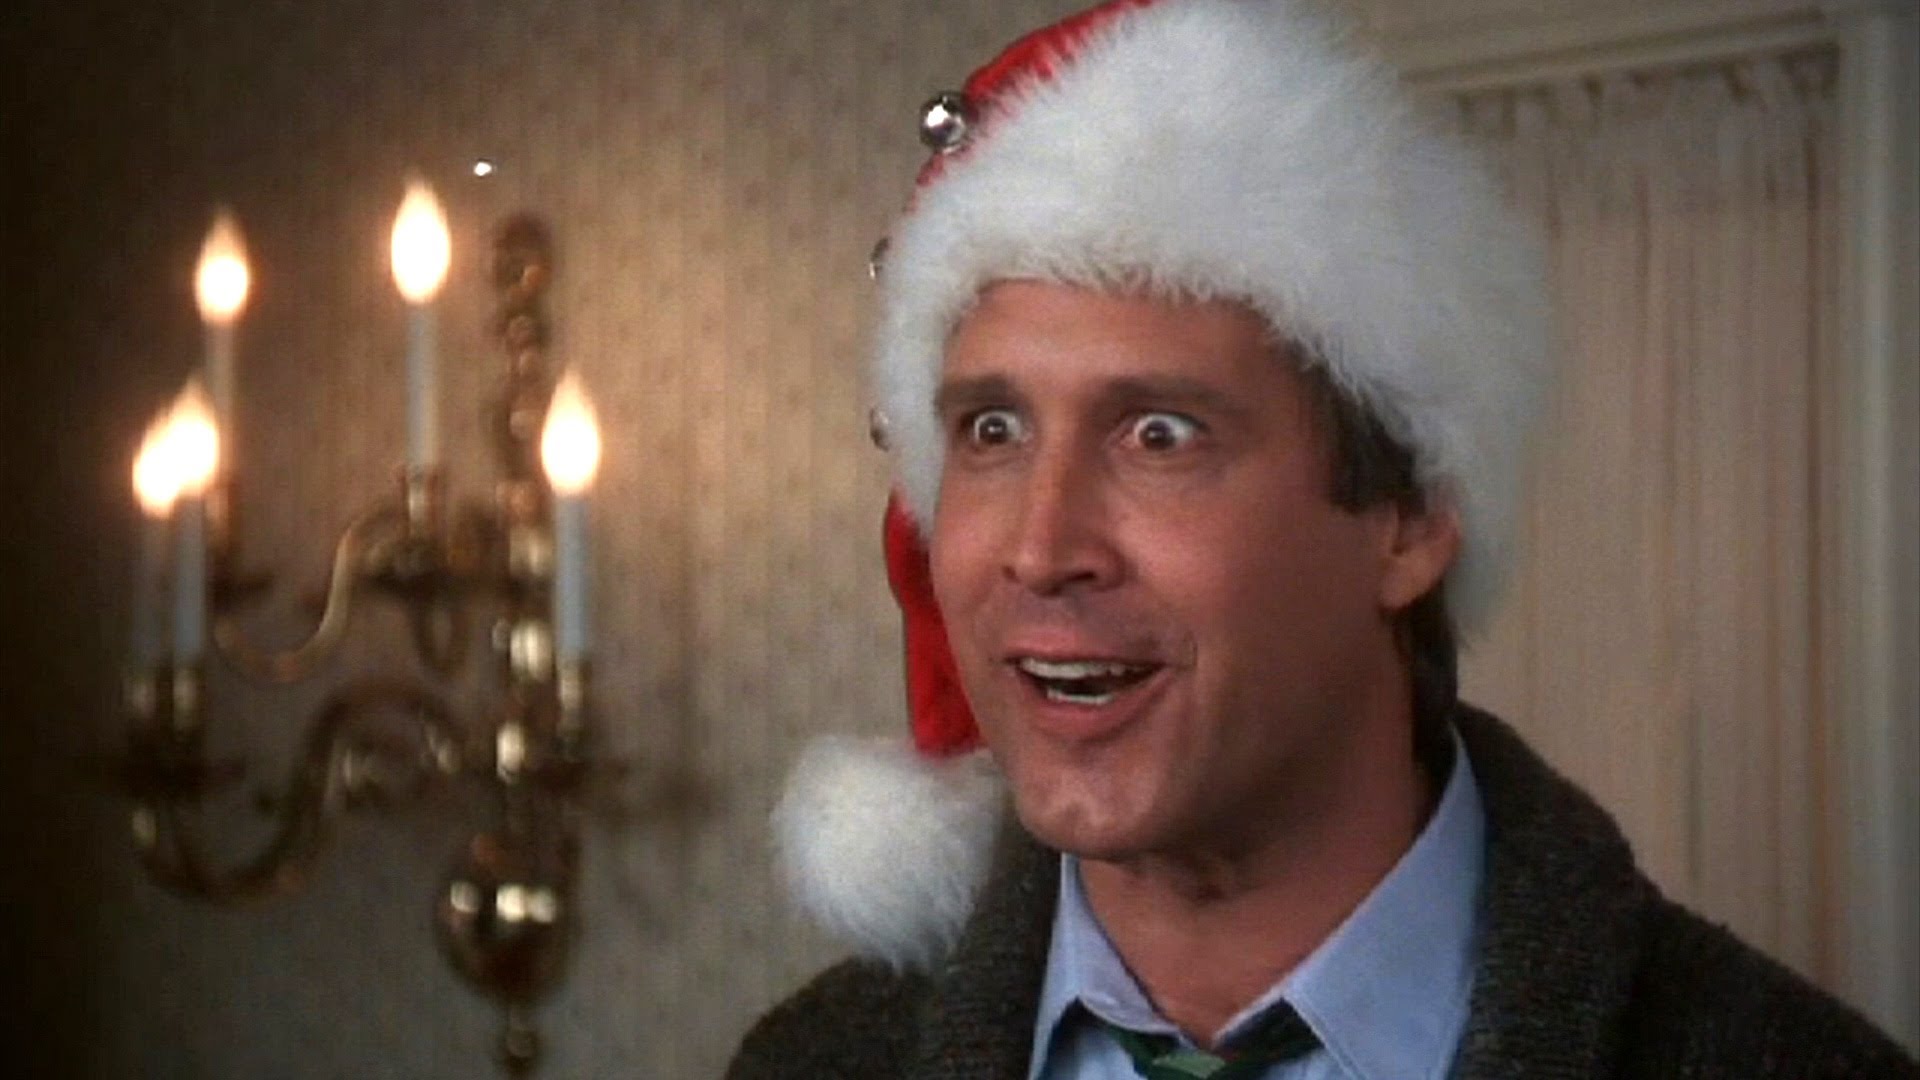 11 Signs You've 100% Turned Into Clark Griswold At Christmas